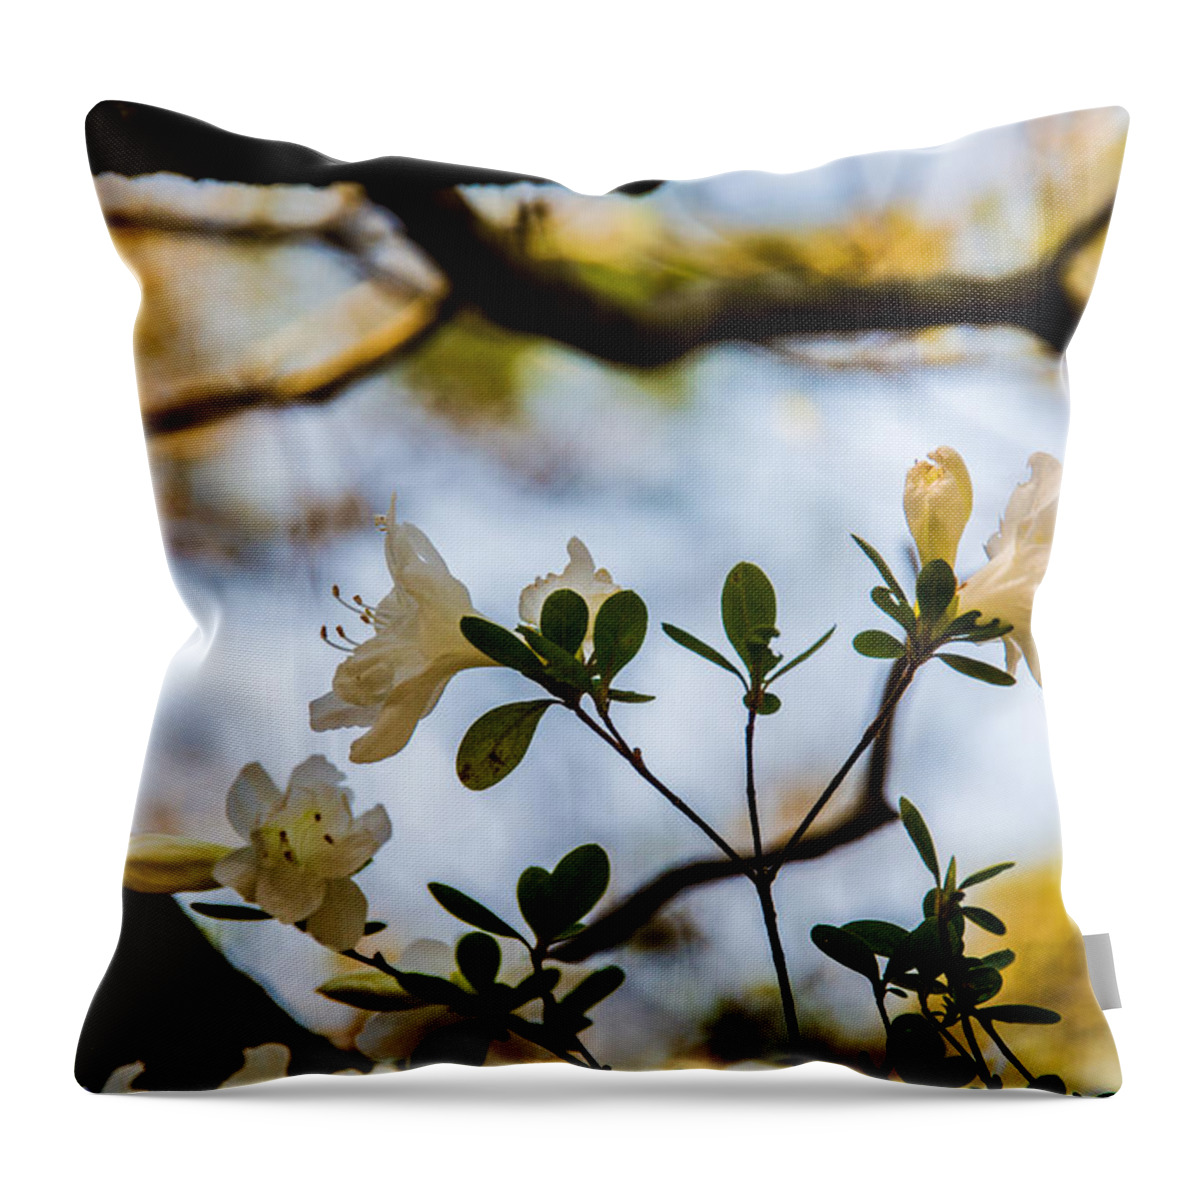 Whie Azaleas Under A Dogwood Tree Framed Prints Throw Pillow featuring the photograph White Azaleas Under a Dogwood Tree by John Harding